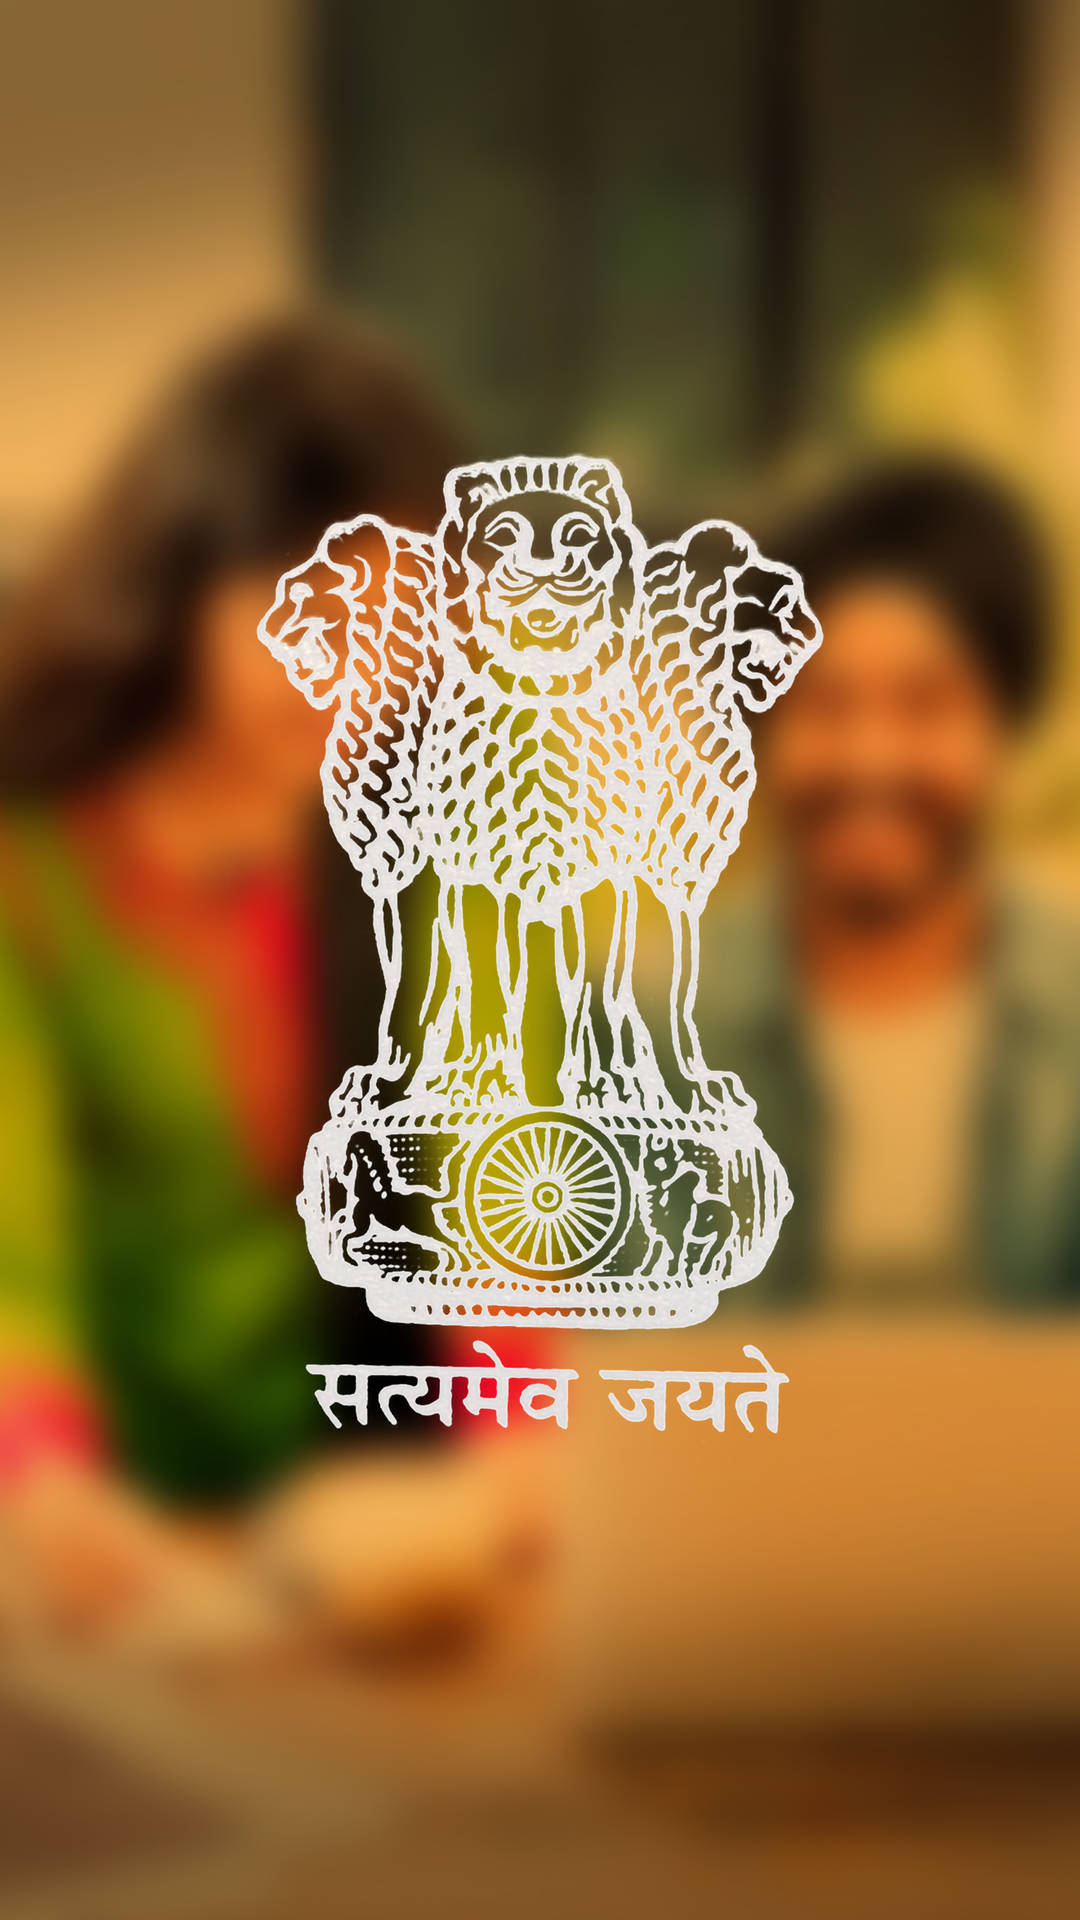 Upsc Logo On Man And Woman Background